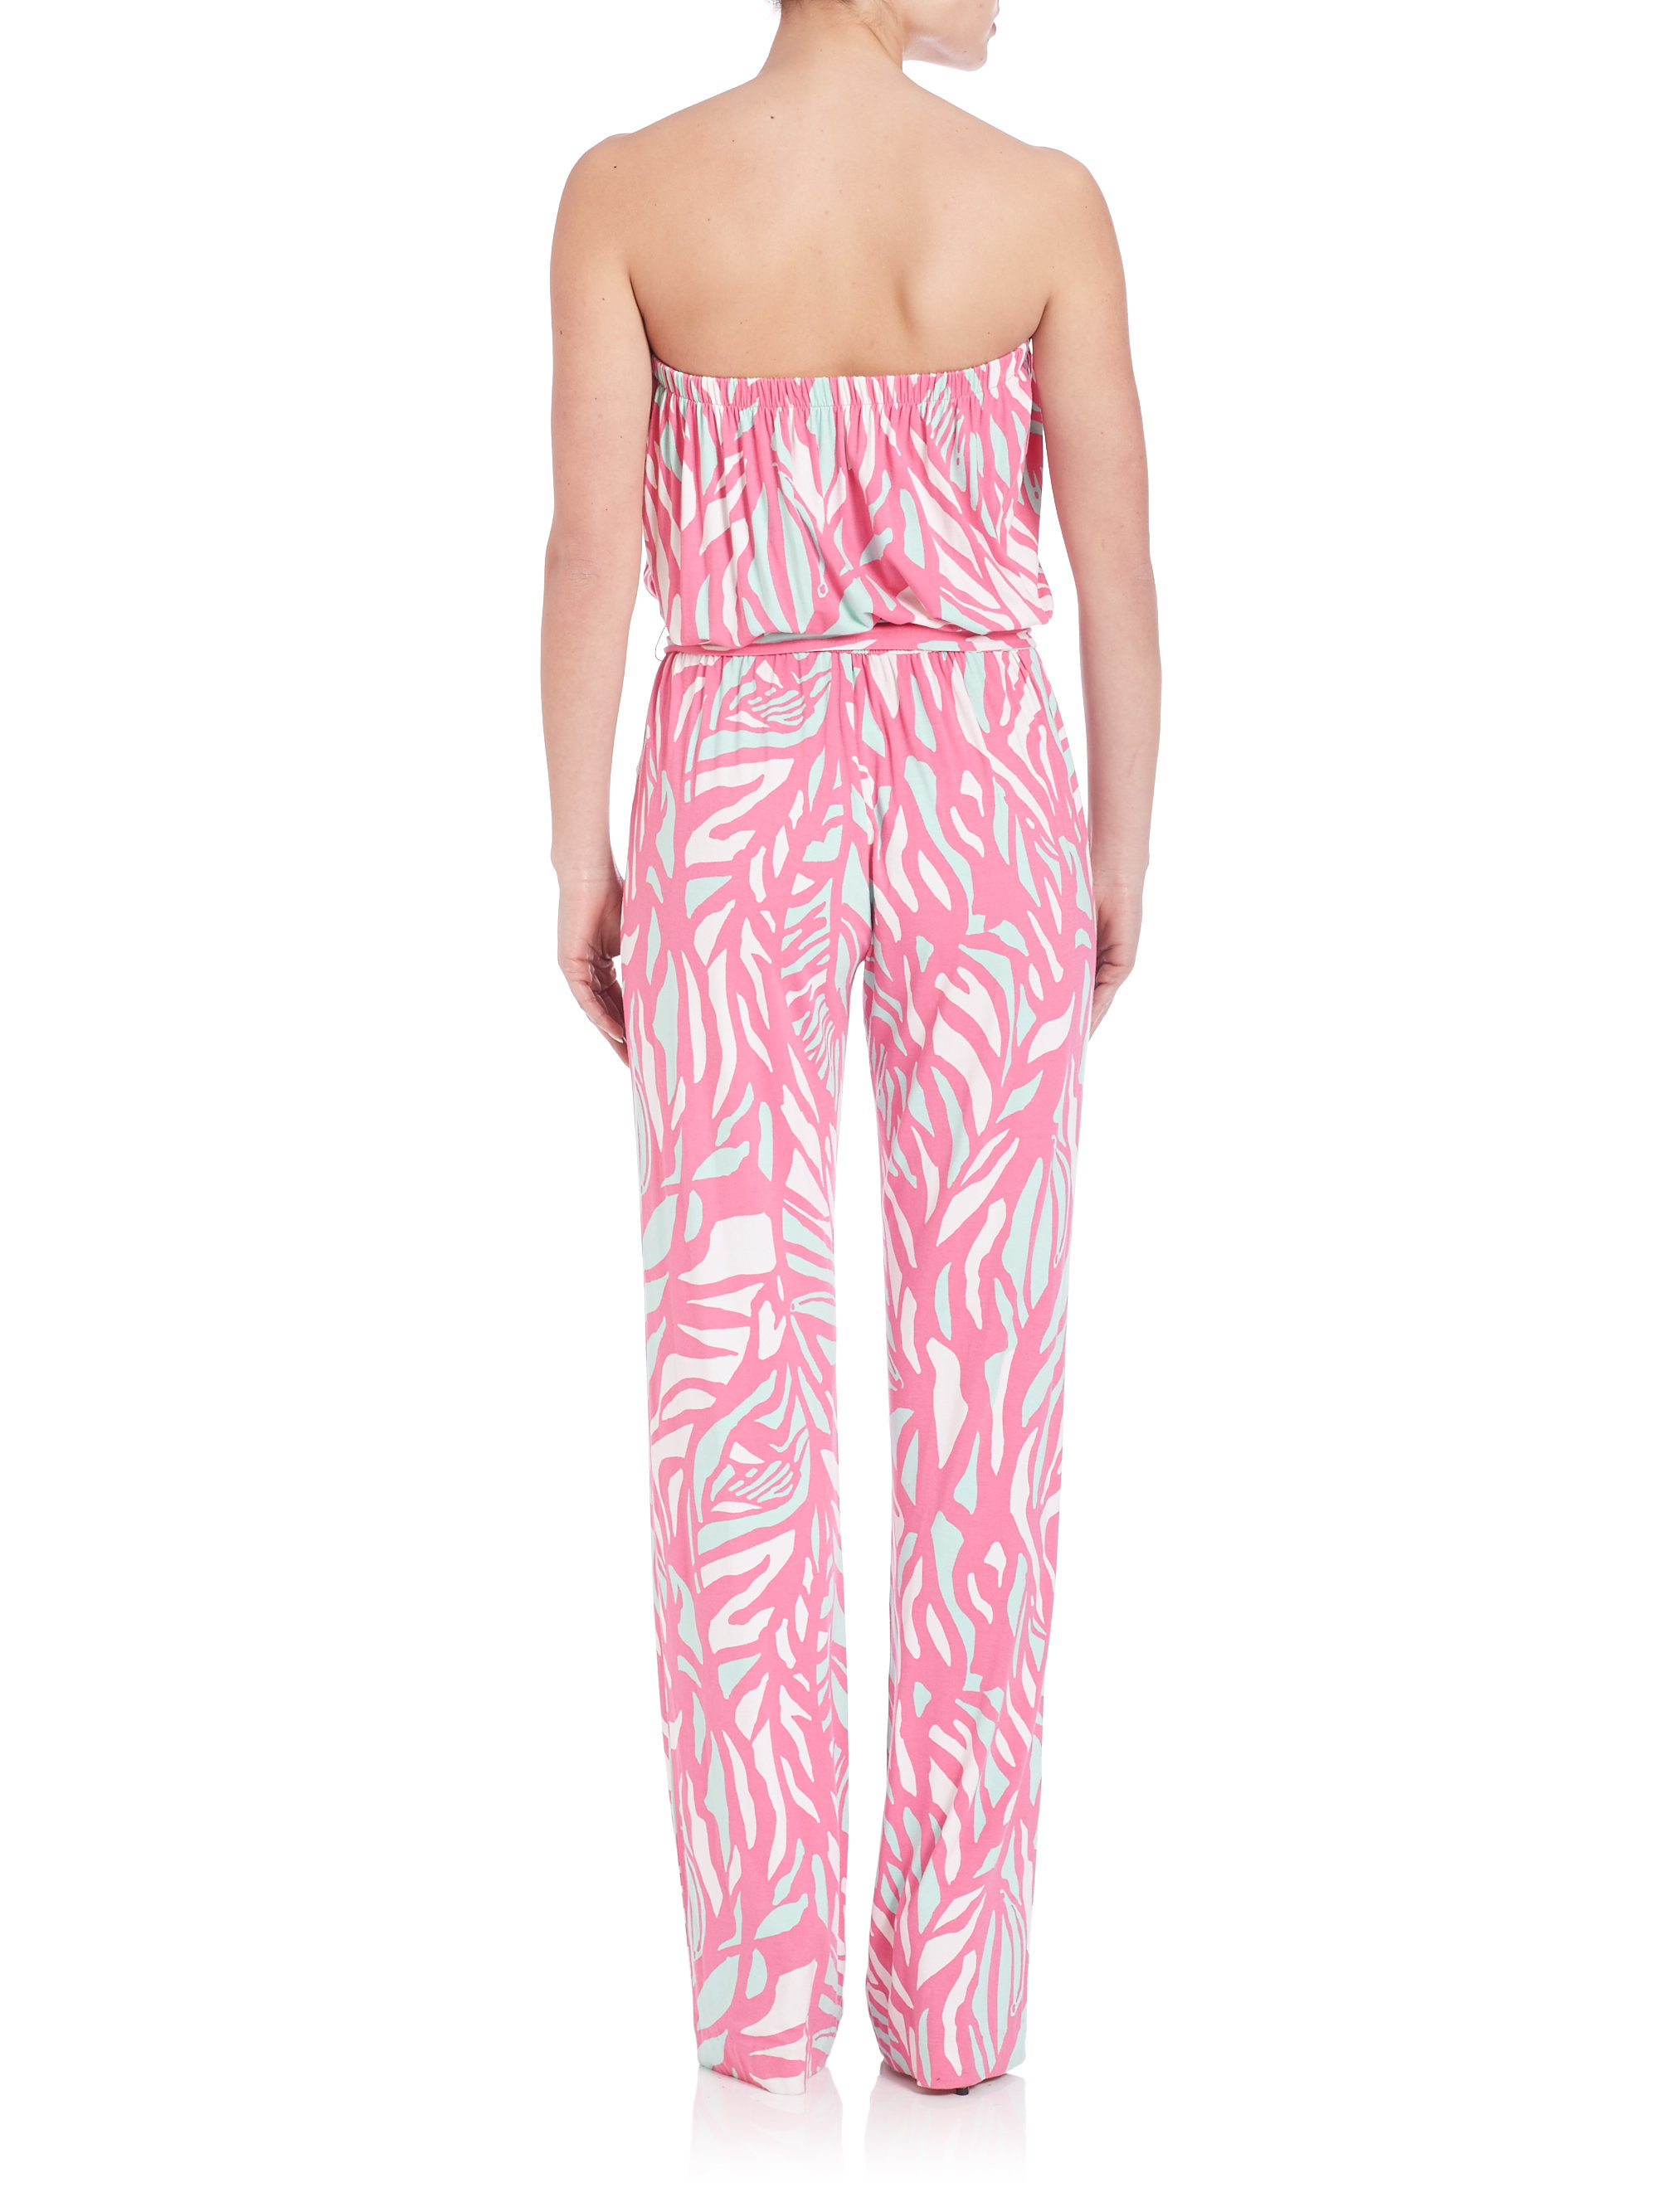 lilly pulitzer strapless jumpsuit